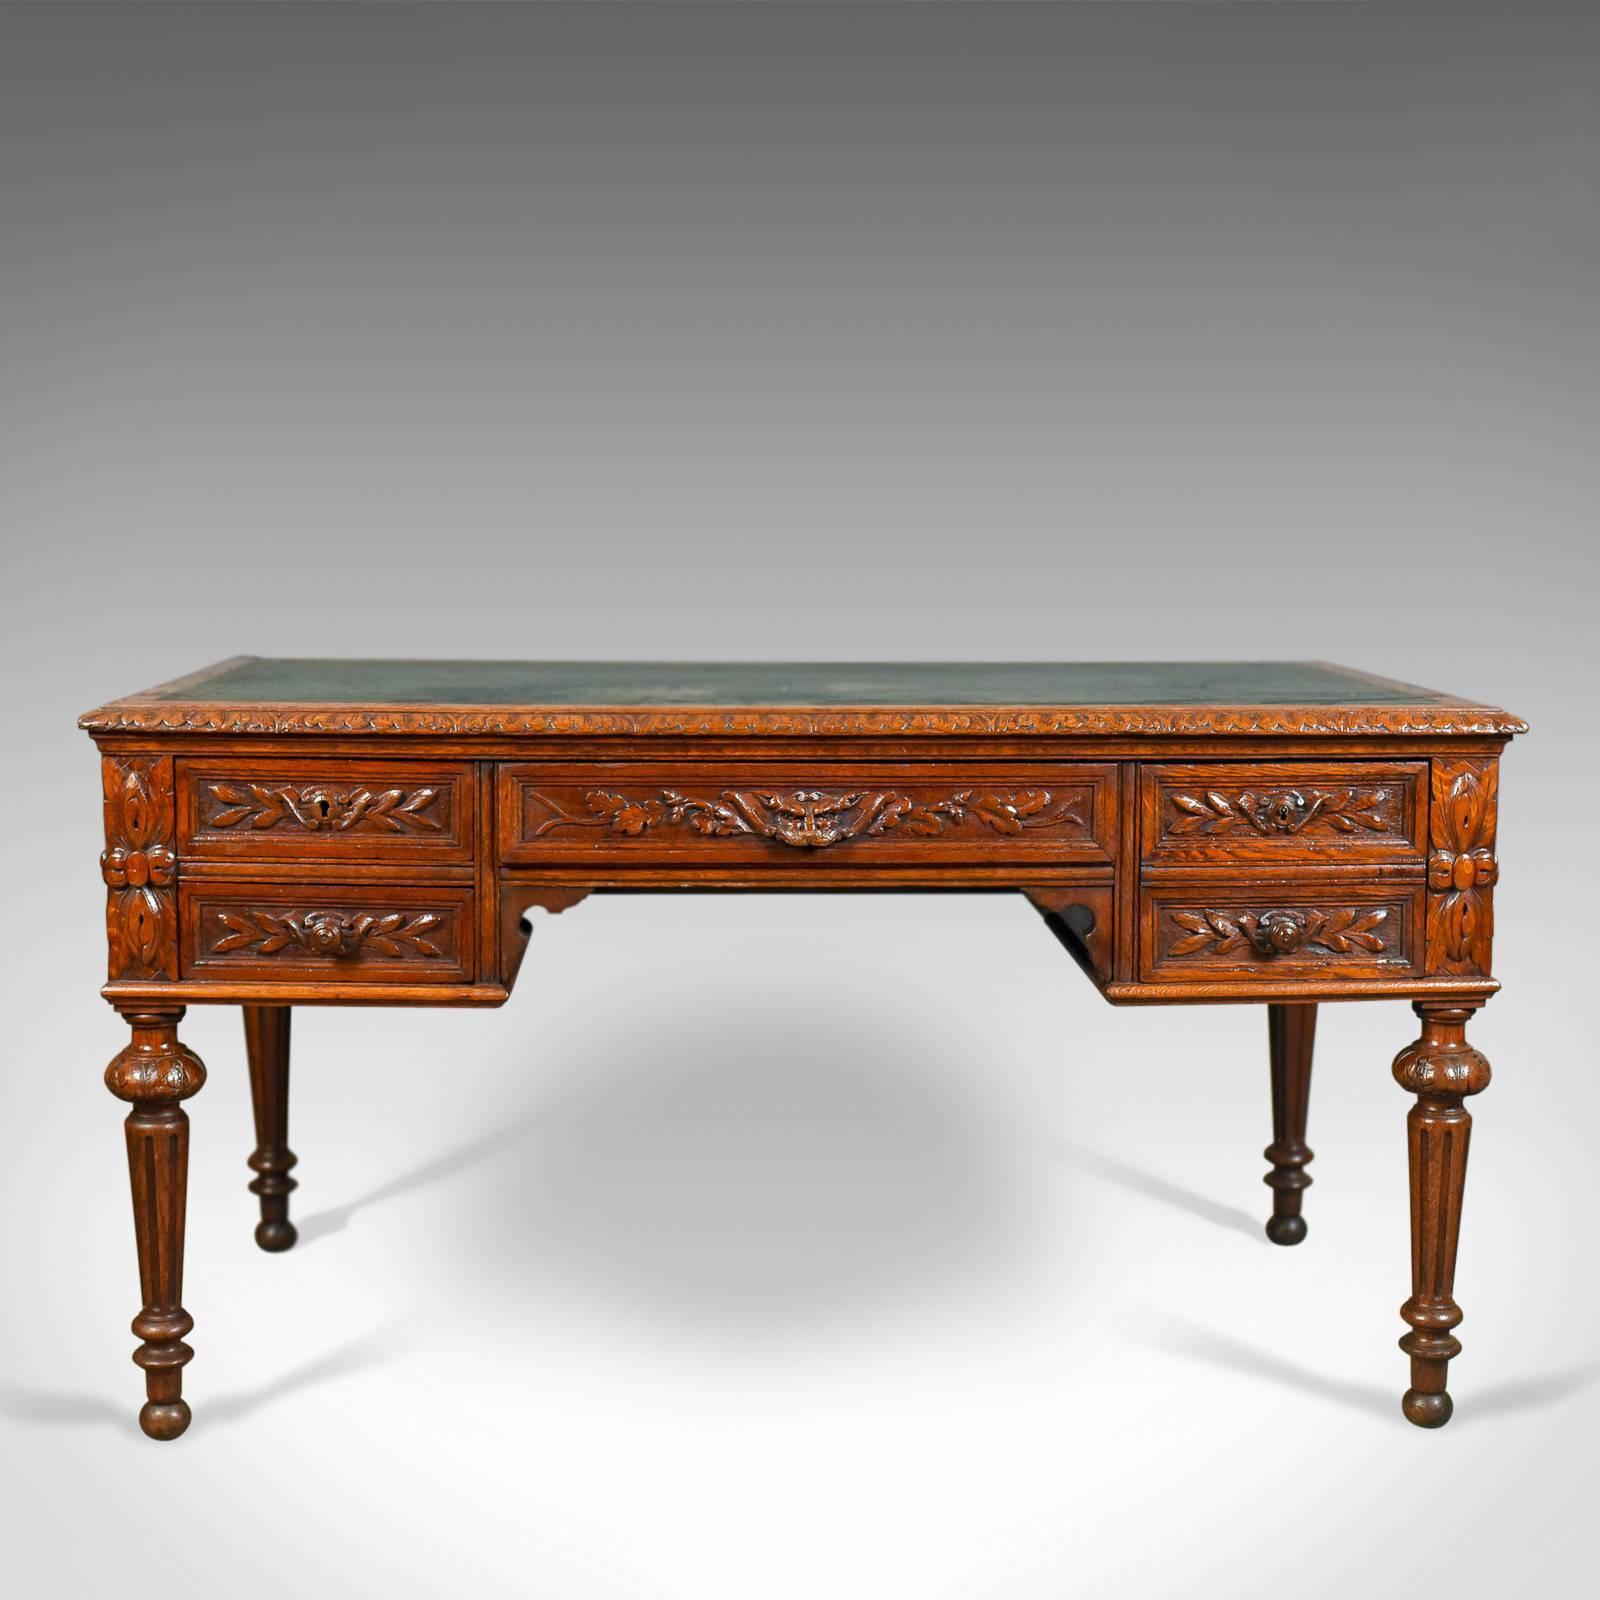 This is an antique writing desk, an oak, green man, Scottish table dating to circa 1890.

Delightfully carved all round, ideal for centre room placement
Appealing russet tones to the oak with a wax polished finish
Inset, Oxford green, tooled